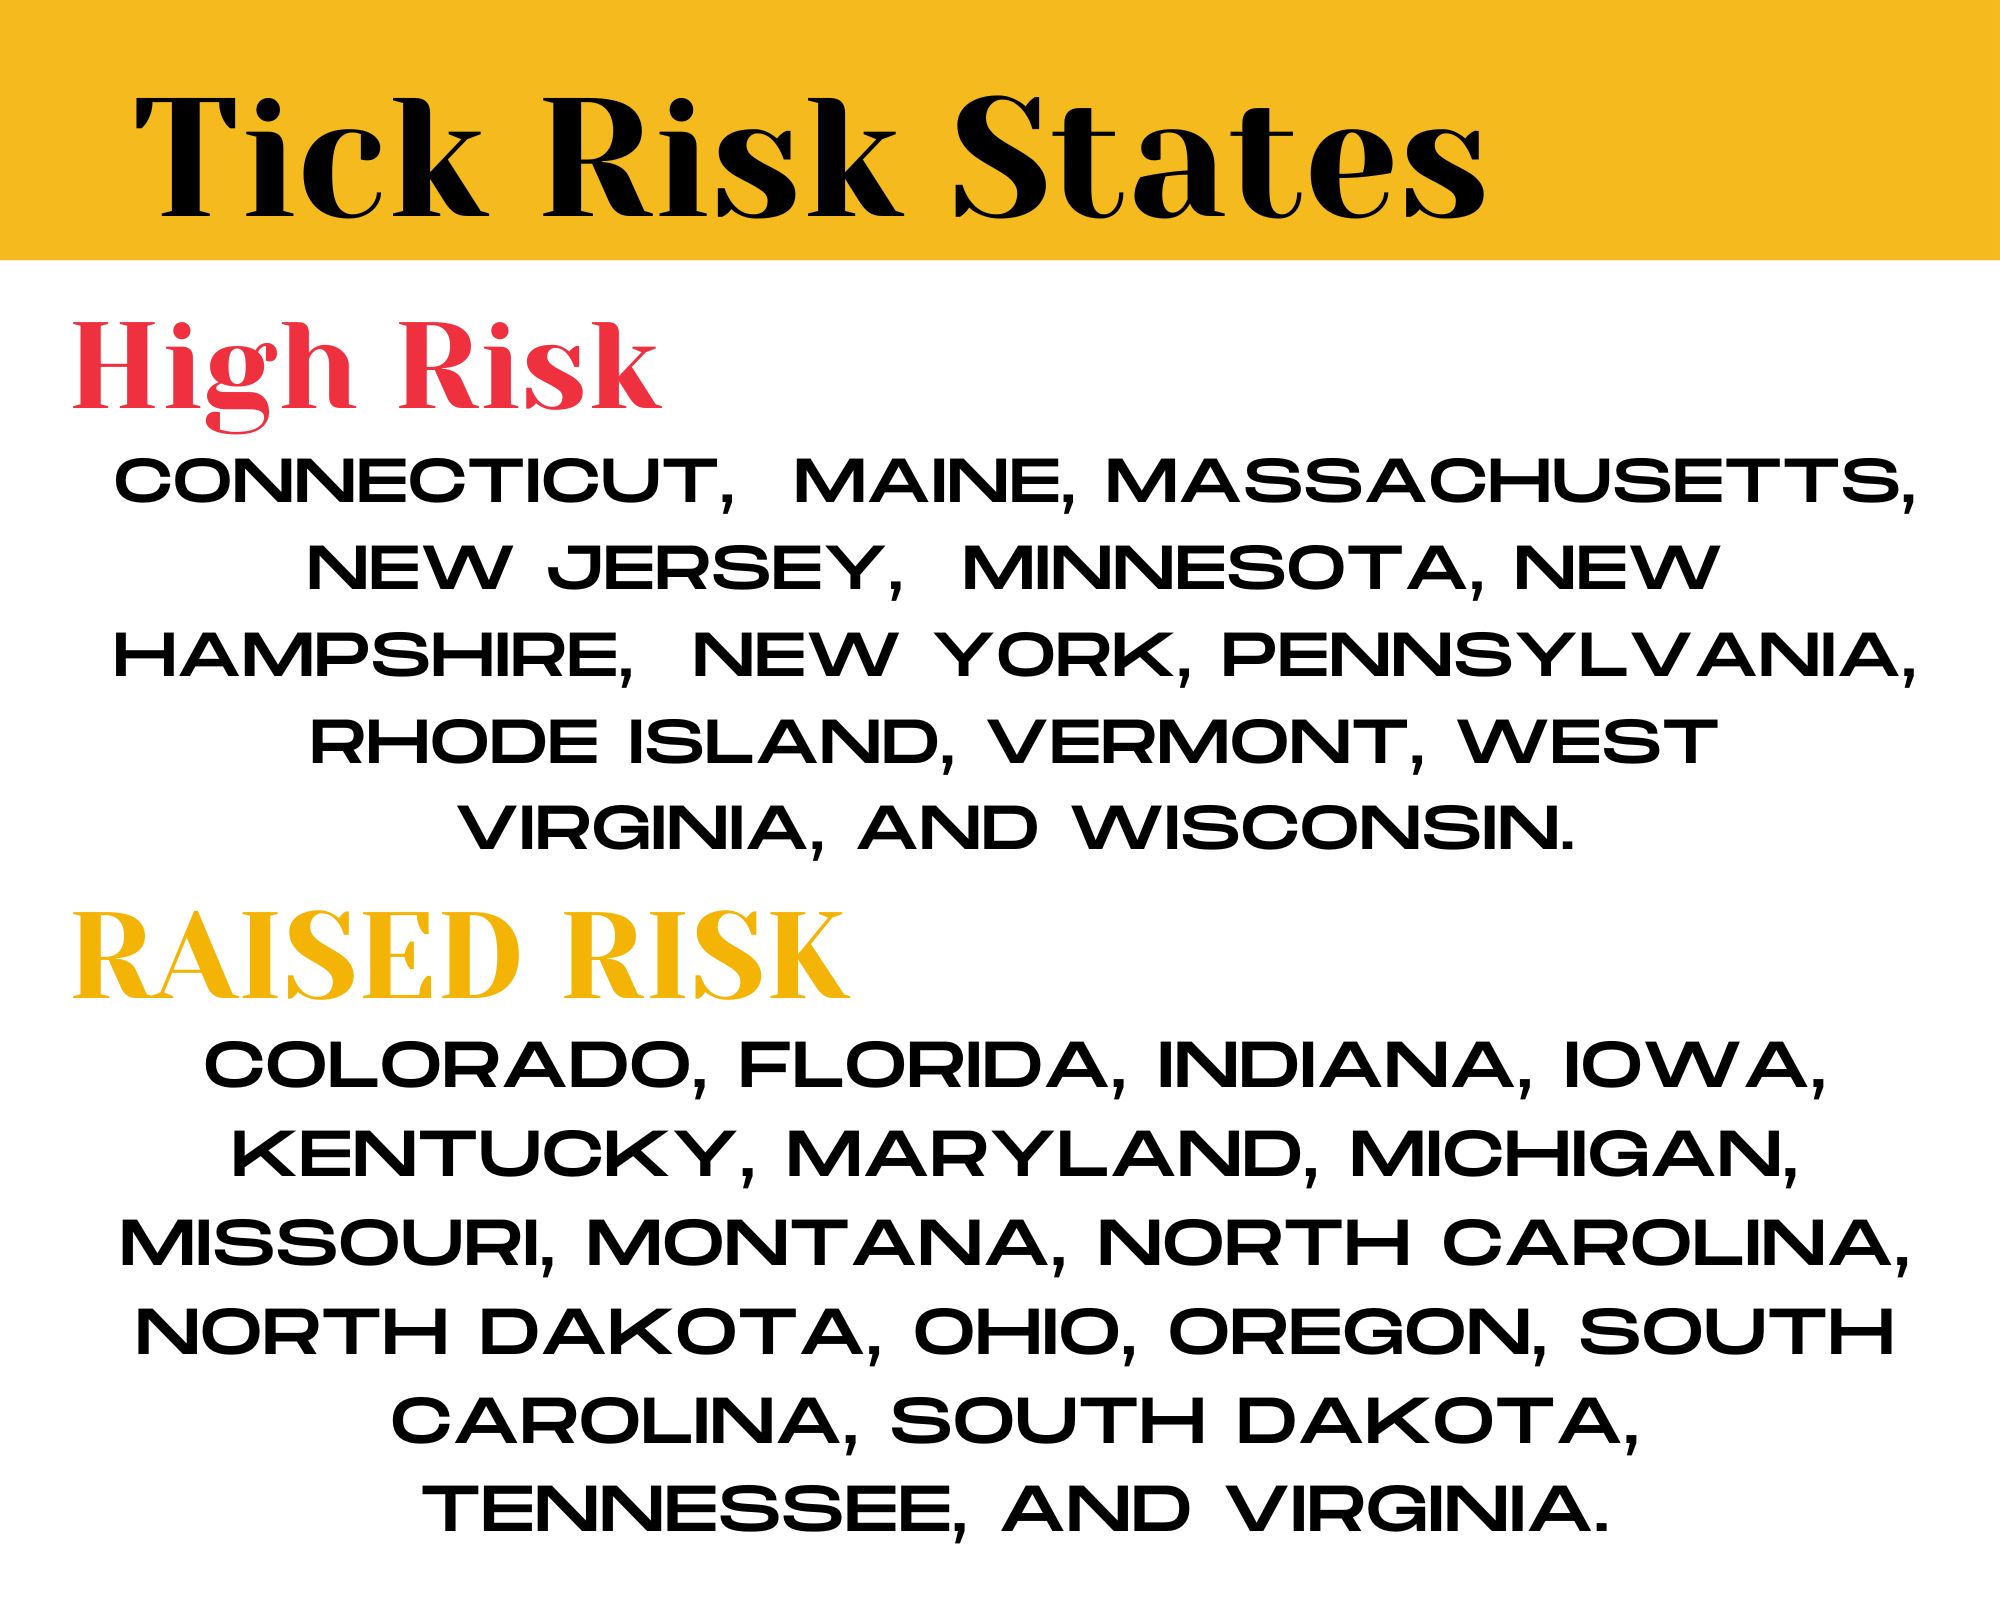 List of states where tick risk is high